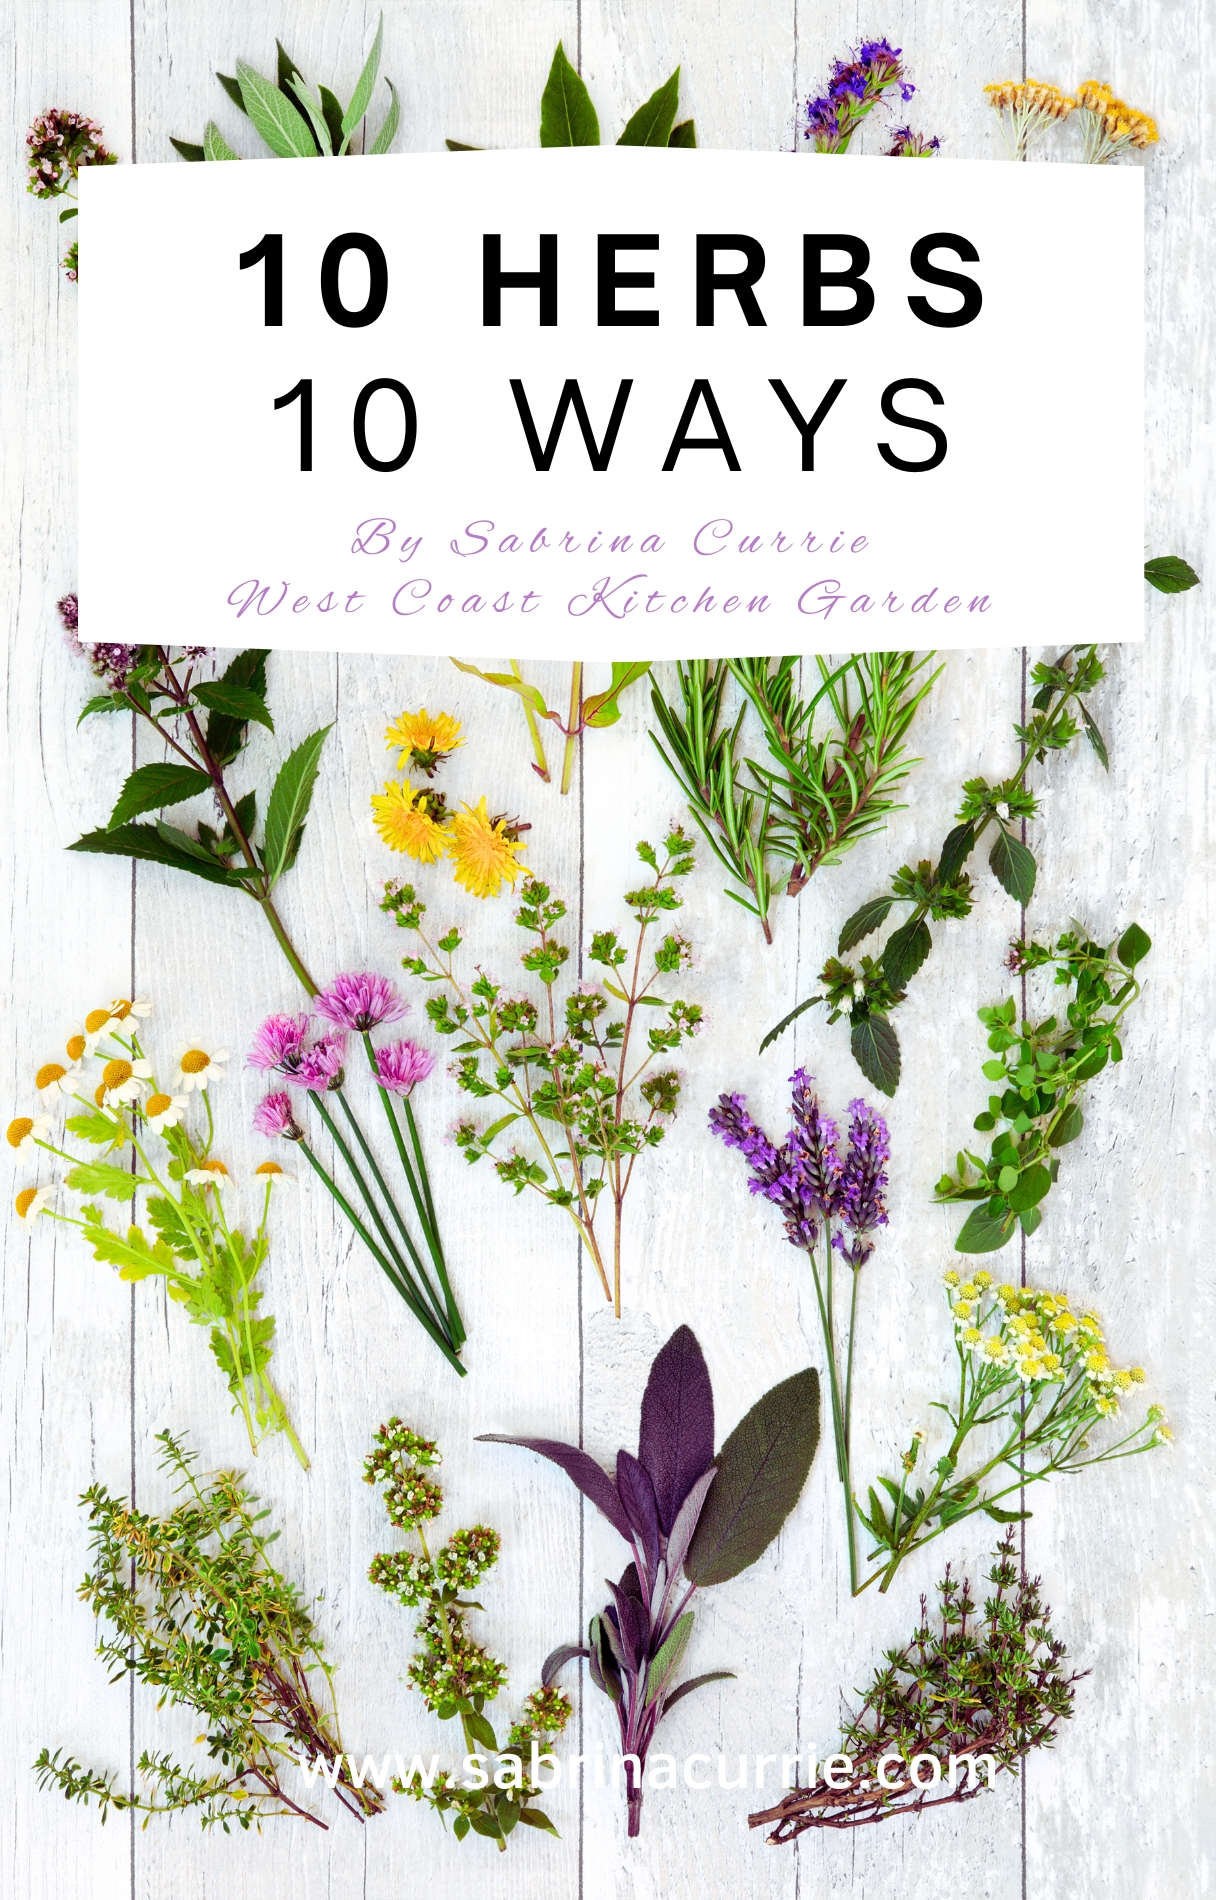 book cover titles 10 herbs 10 ways by Sabrina Currie West Coast Kitchen Garden over top of a white table full of various herbs.